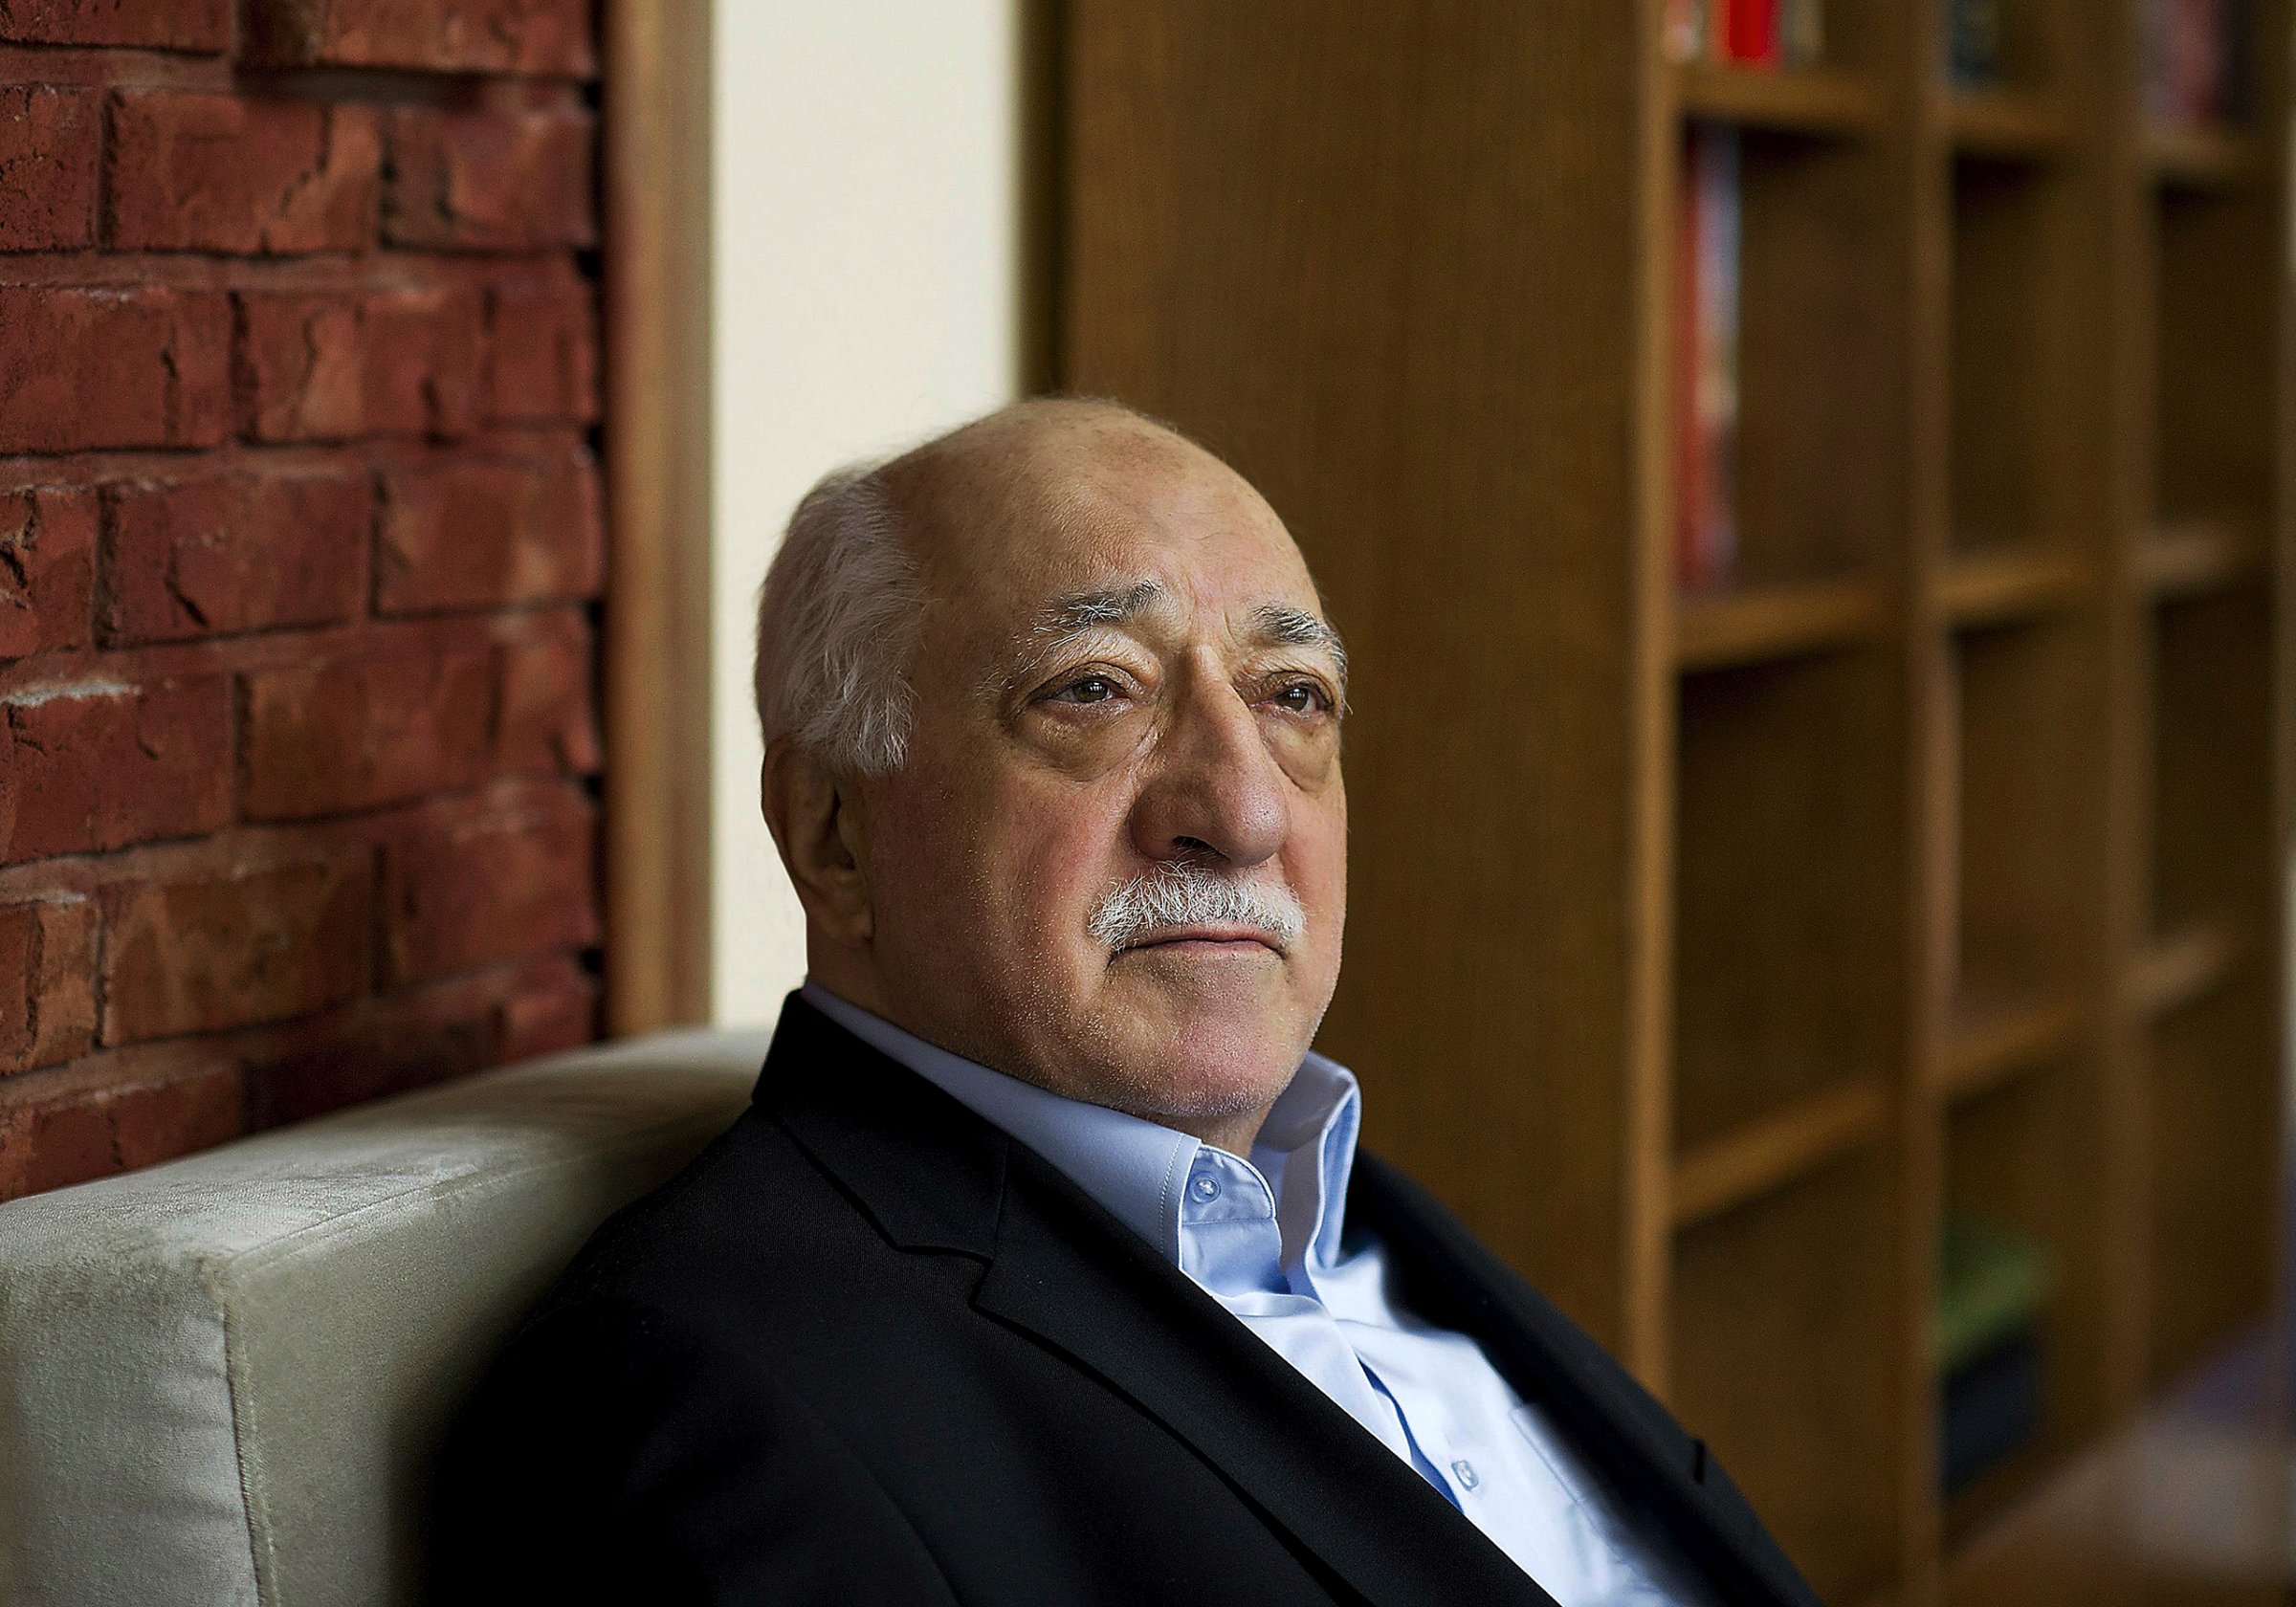 In this March 15, 2014, file photo, Turkish Islamic preacher Fethullah Gulen sits in his residence in Saylorsburg, Pa.